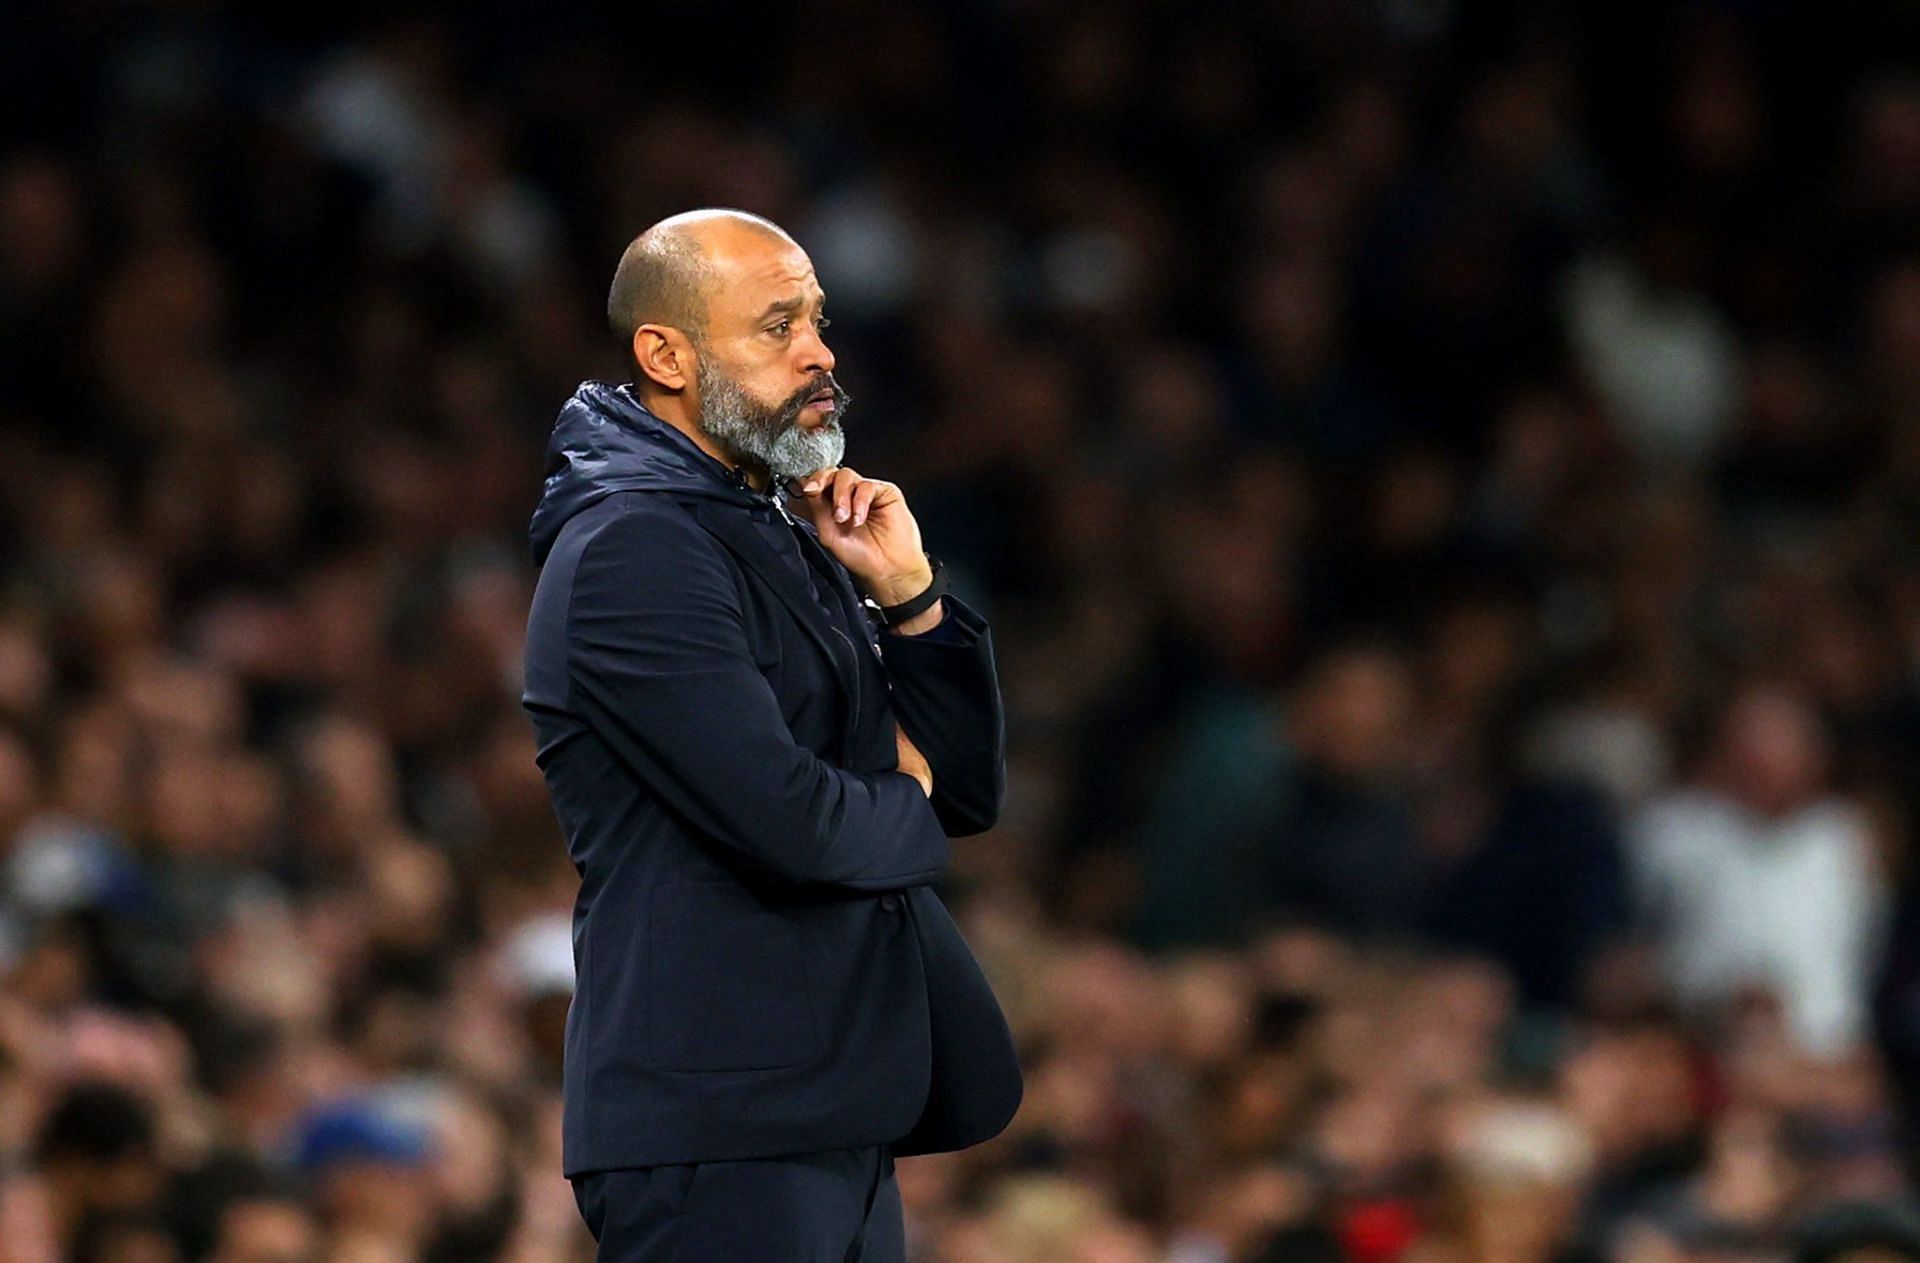 Nuno Espirito Santo has been sacked after just four months in charge of Tottenham.